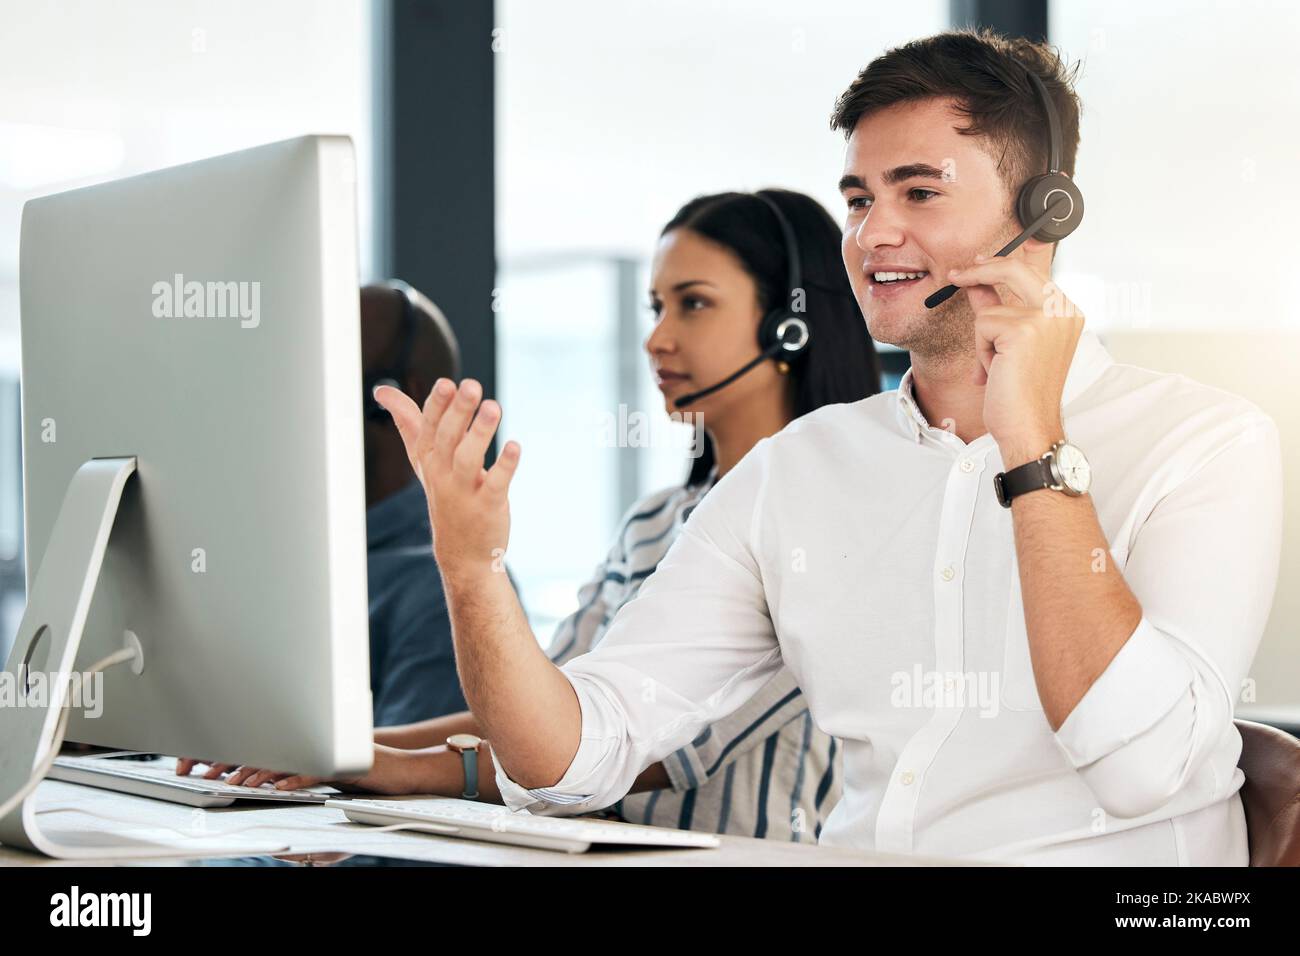 Computer customer support and crm man employee on an office phone consultation. Speaking internet and web call center employee consultant with headset Stock Photo